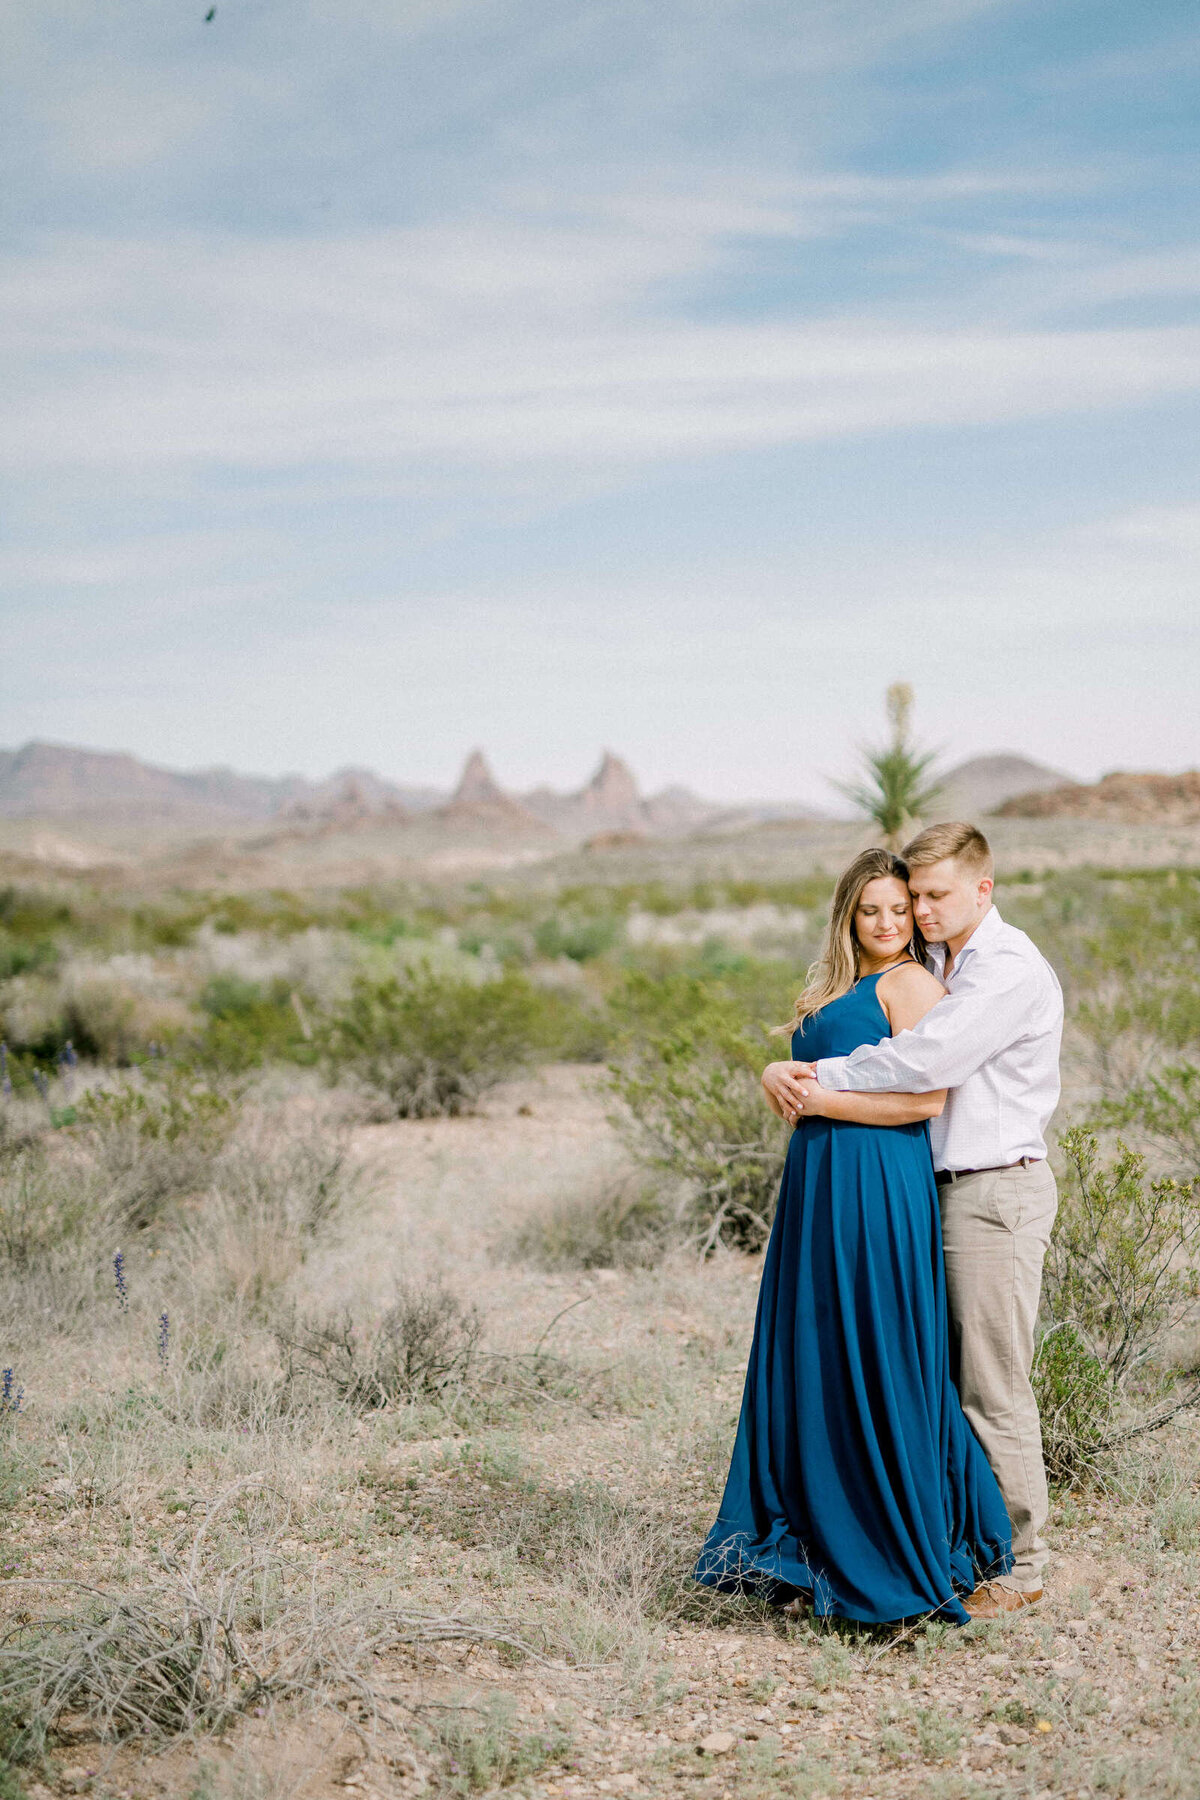 DFW Wedding Photographer Kate Panza_BigBend Engagement_Brittany_Carter_0947